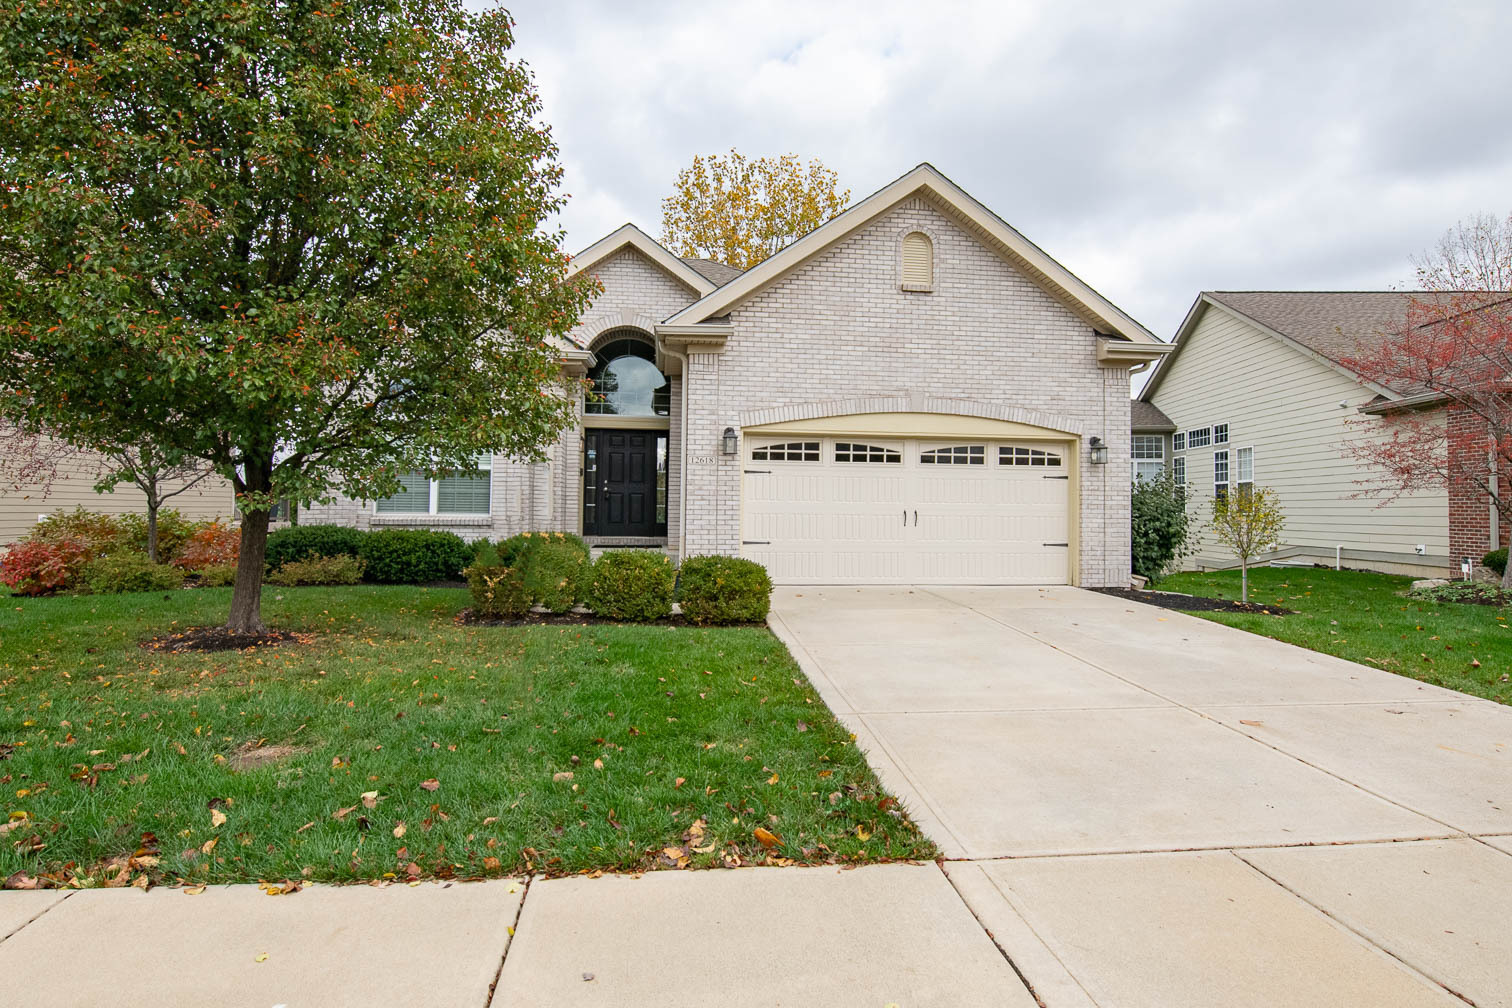 Sold: 12618 Broadmoor Court N, Fishers, IN 46038 | 4 Beds / 3 Full ...